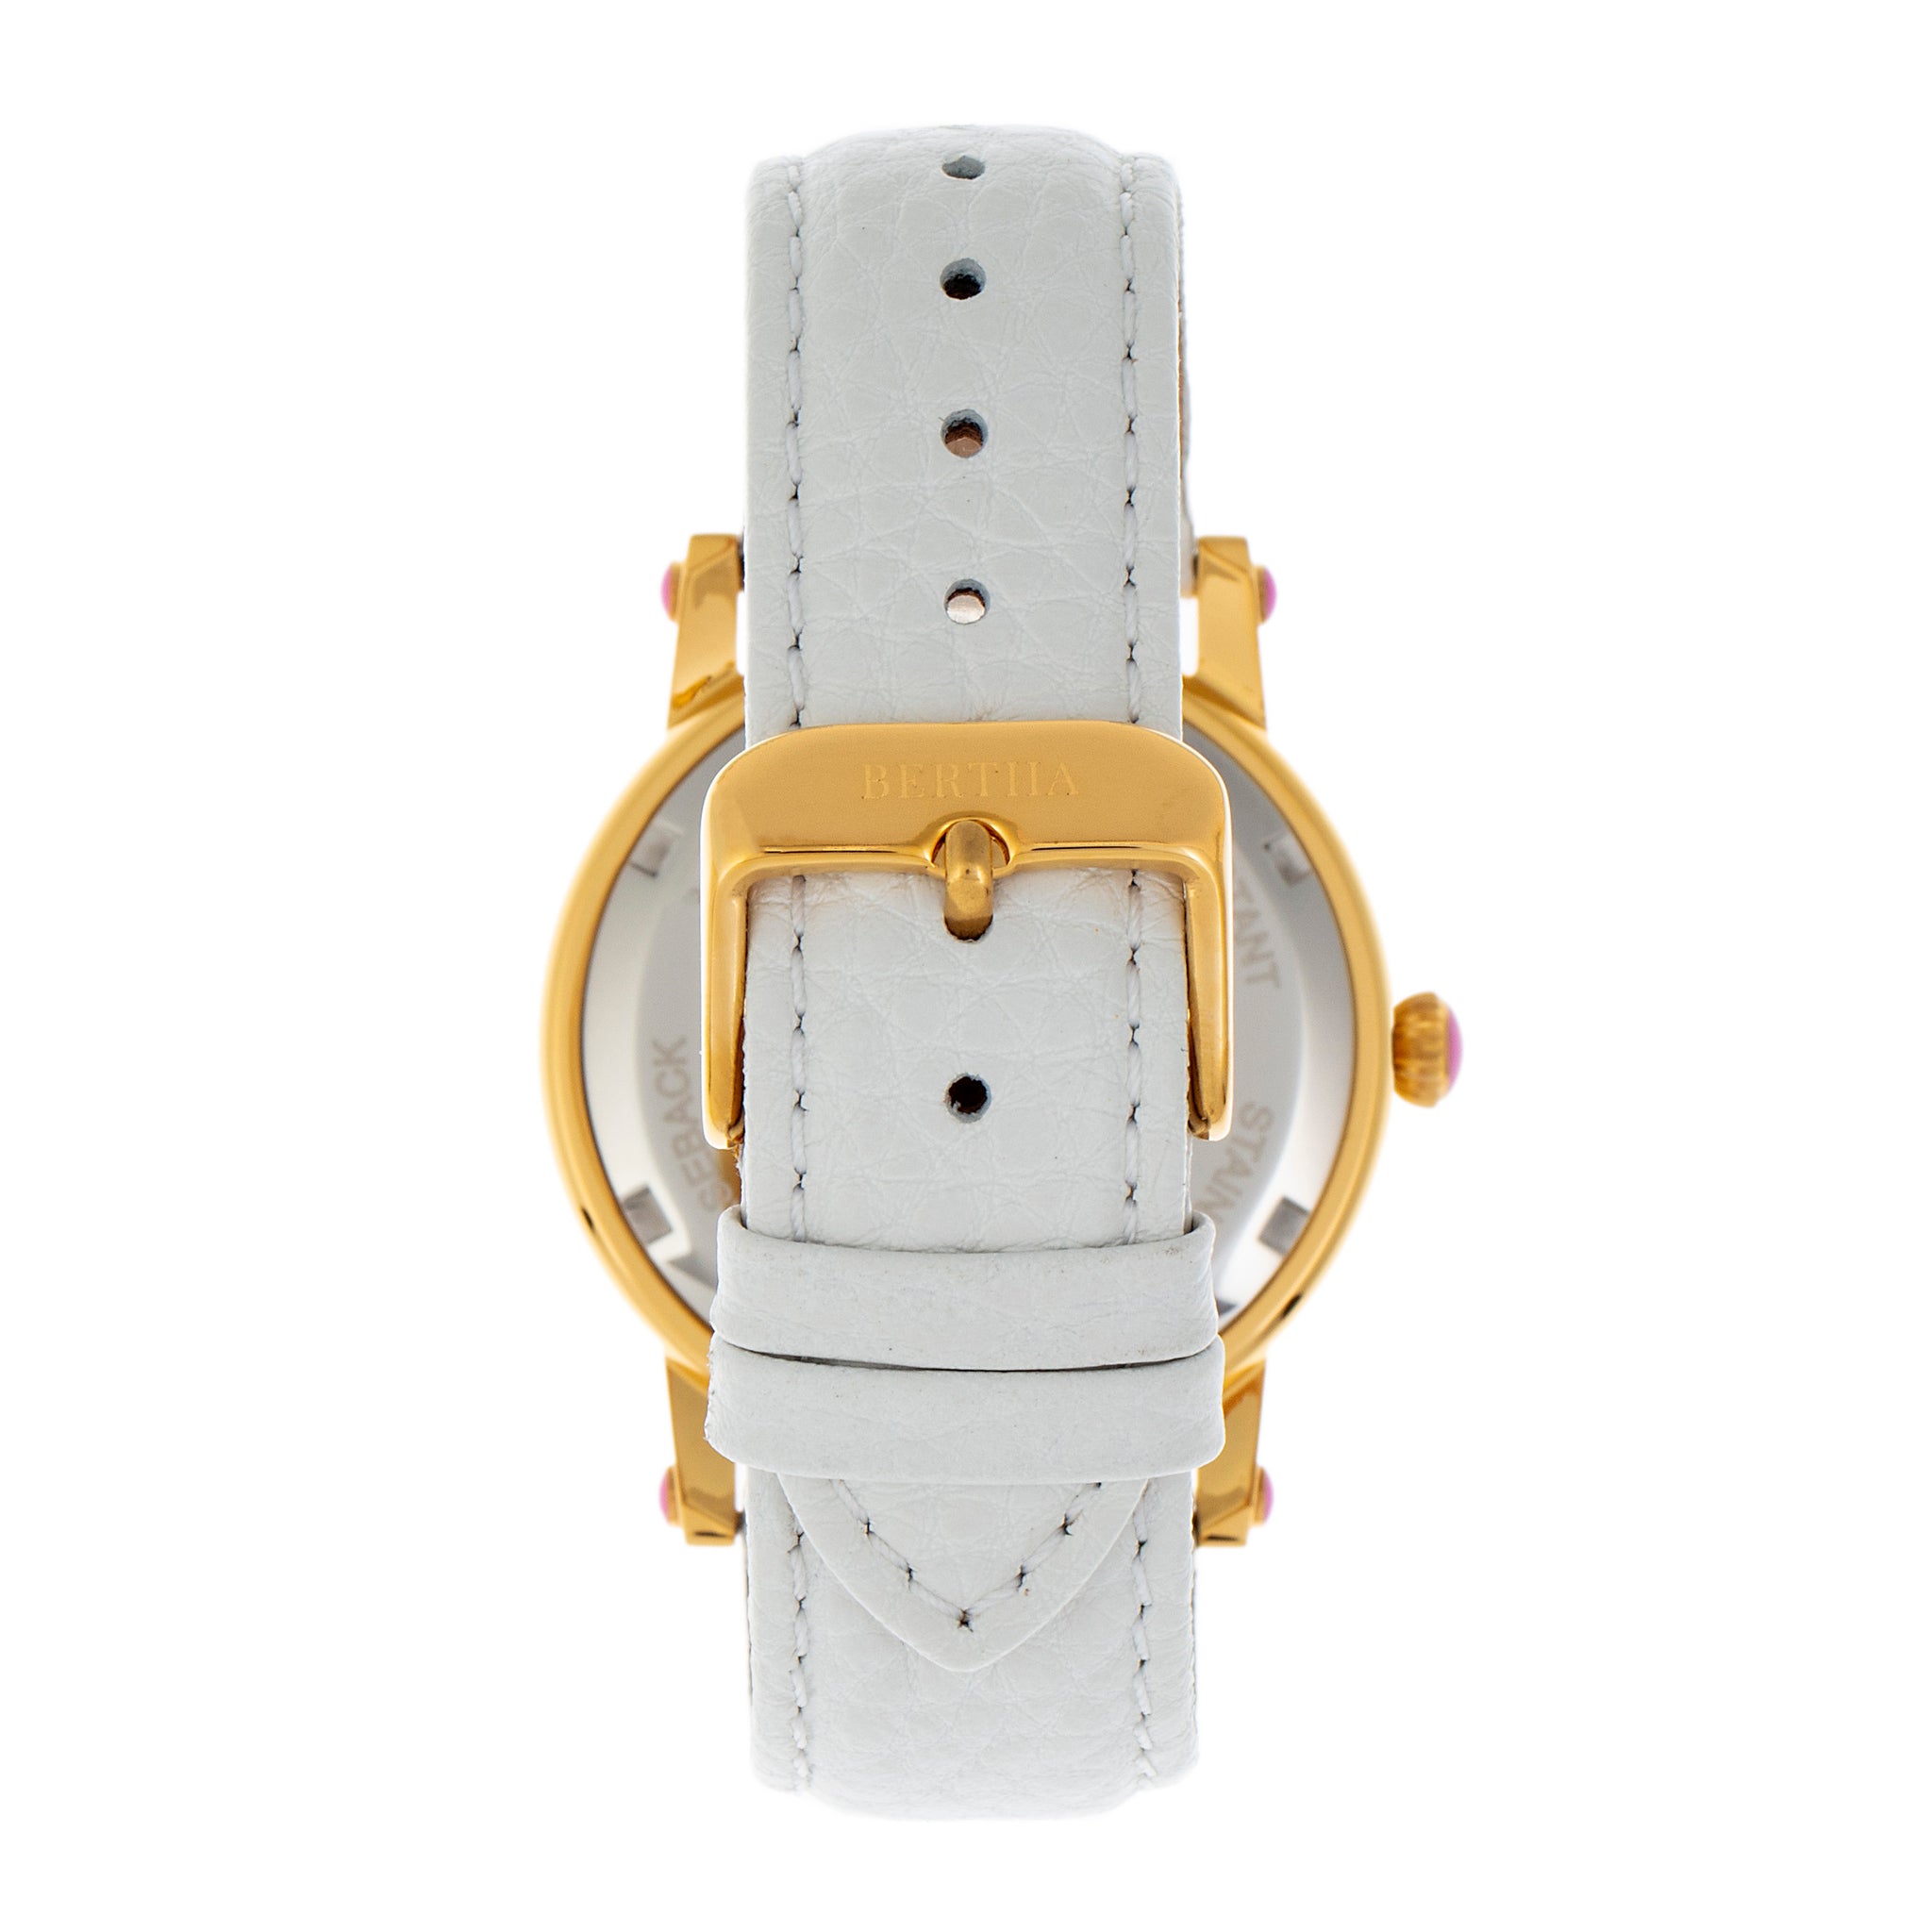 Bertha Betsy MOP Leather-Band Ladies Watch - Gold/White - BTHBR5703